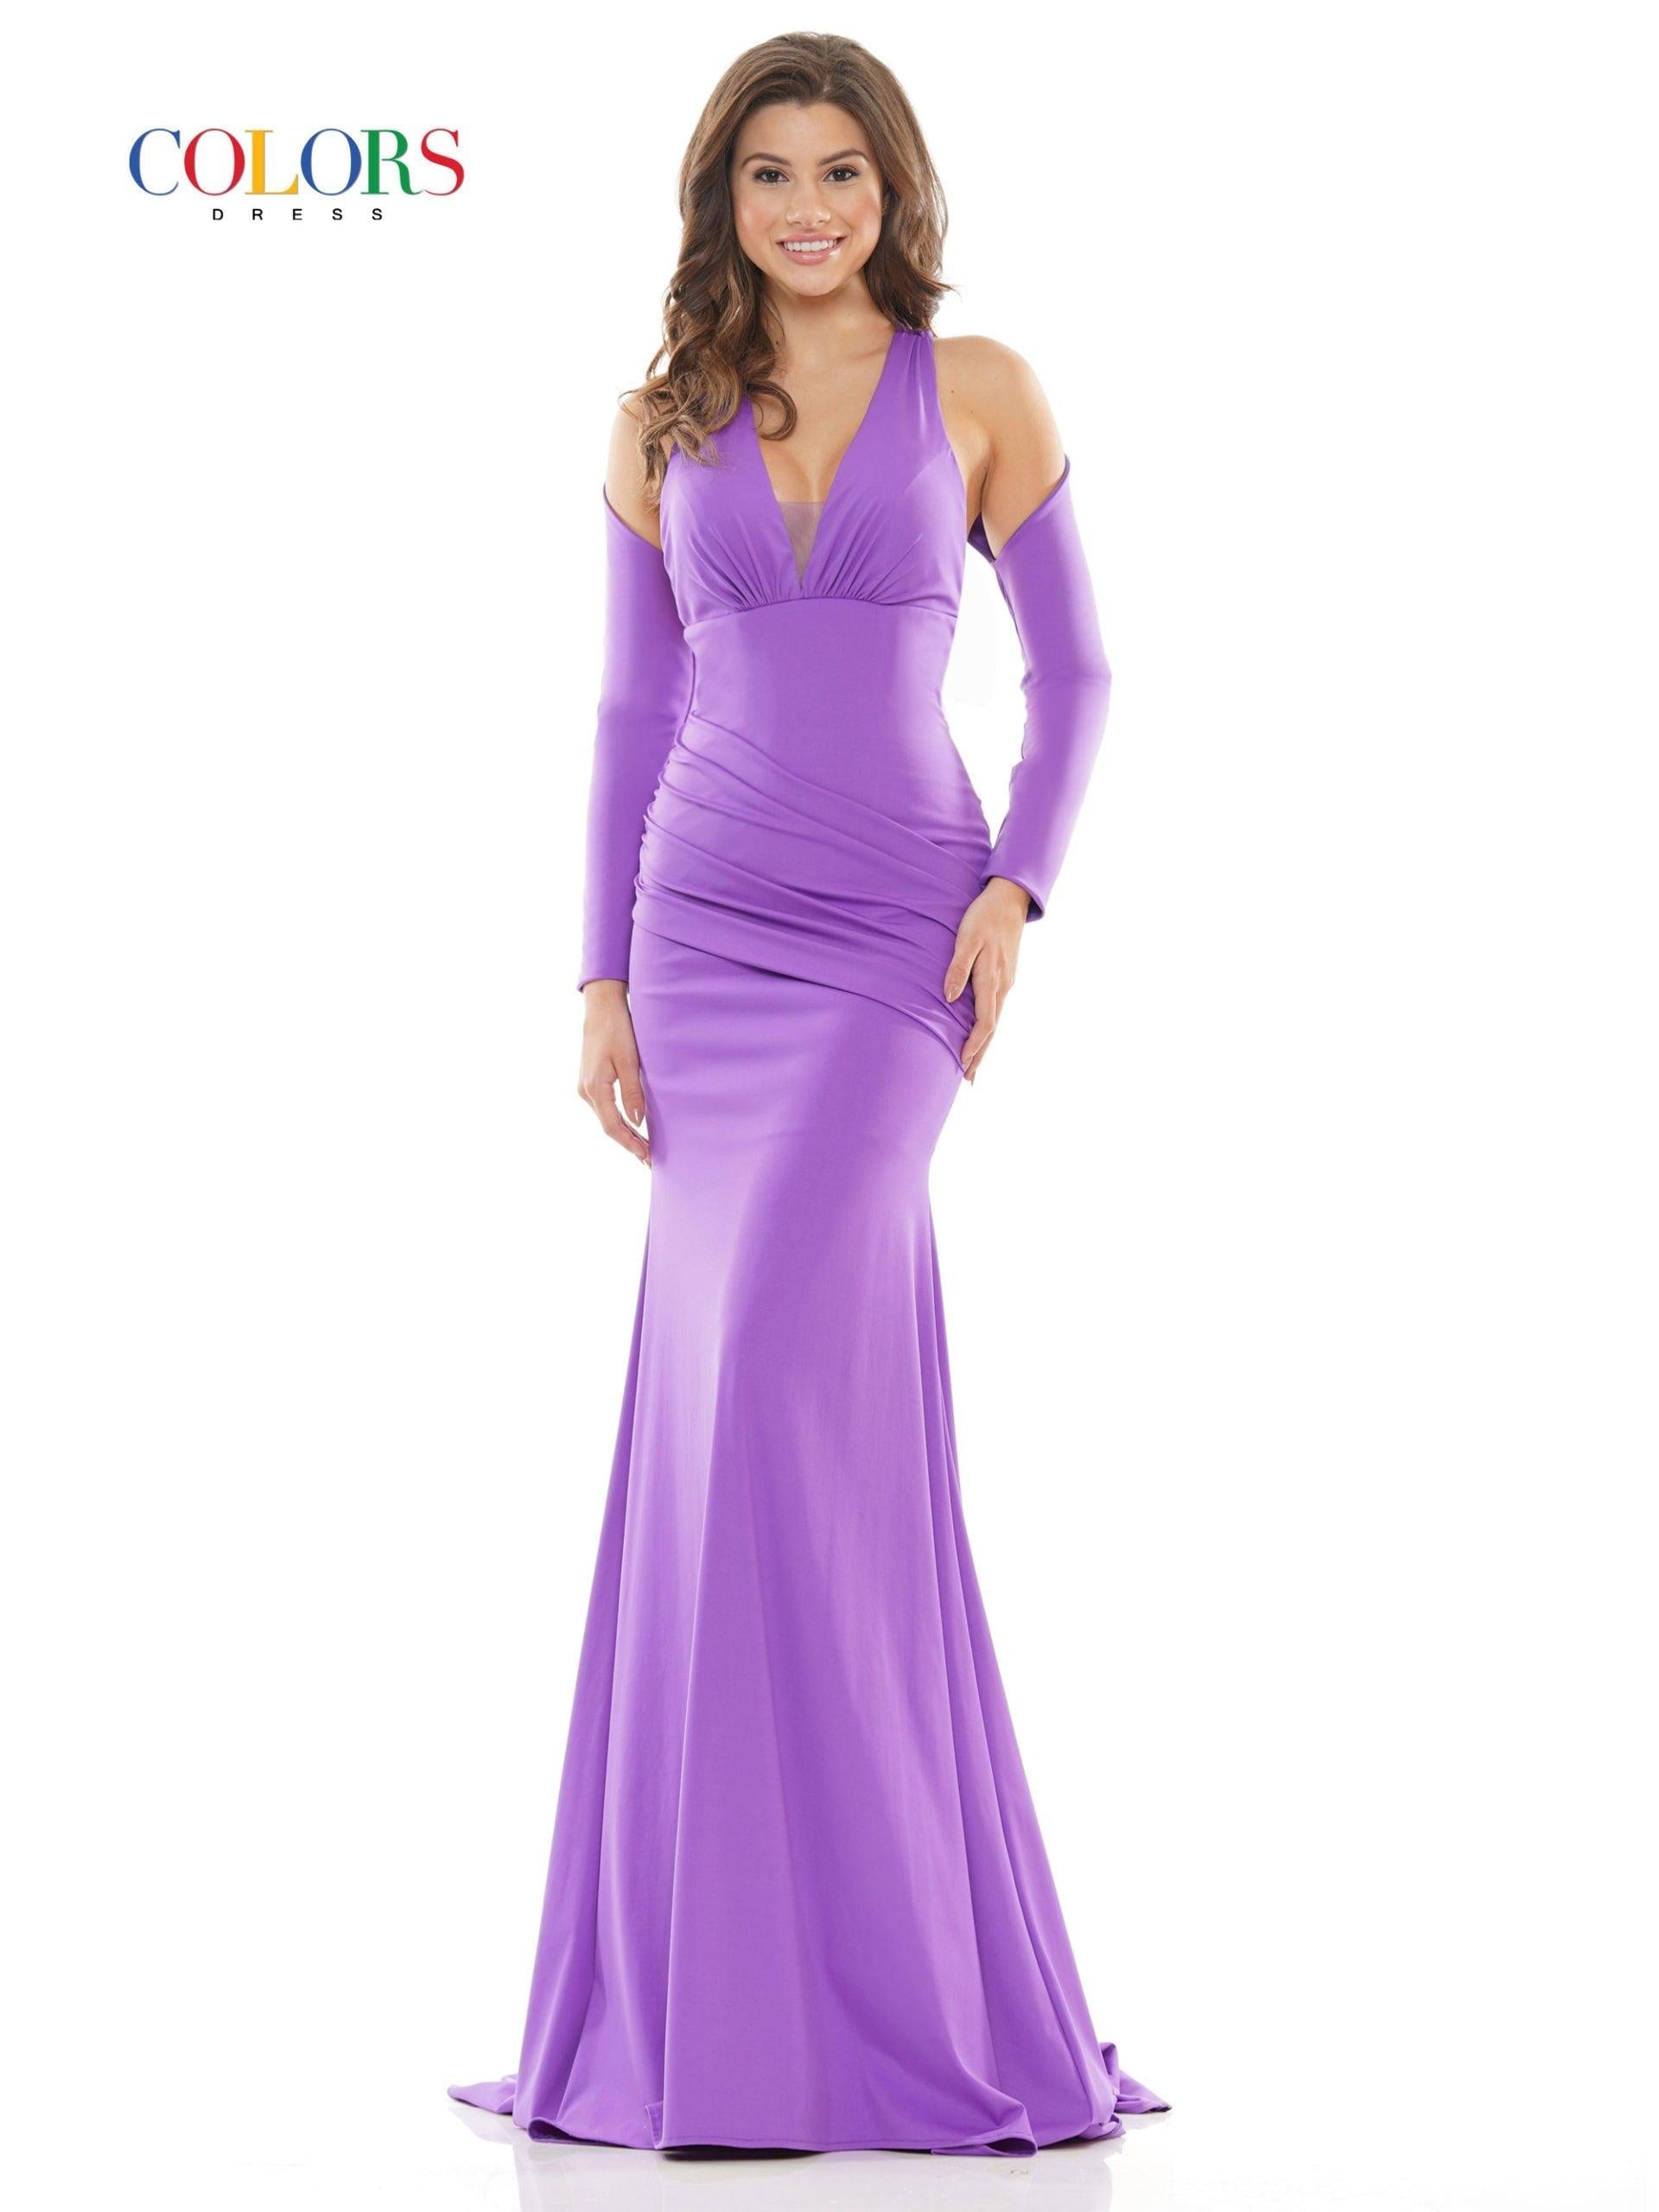 Colors Prom Long Formal Fitted Dress 2689 - The Dress Outlet